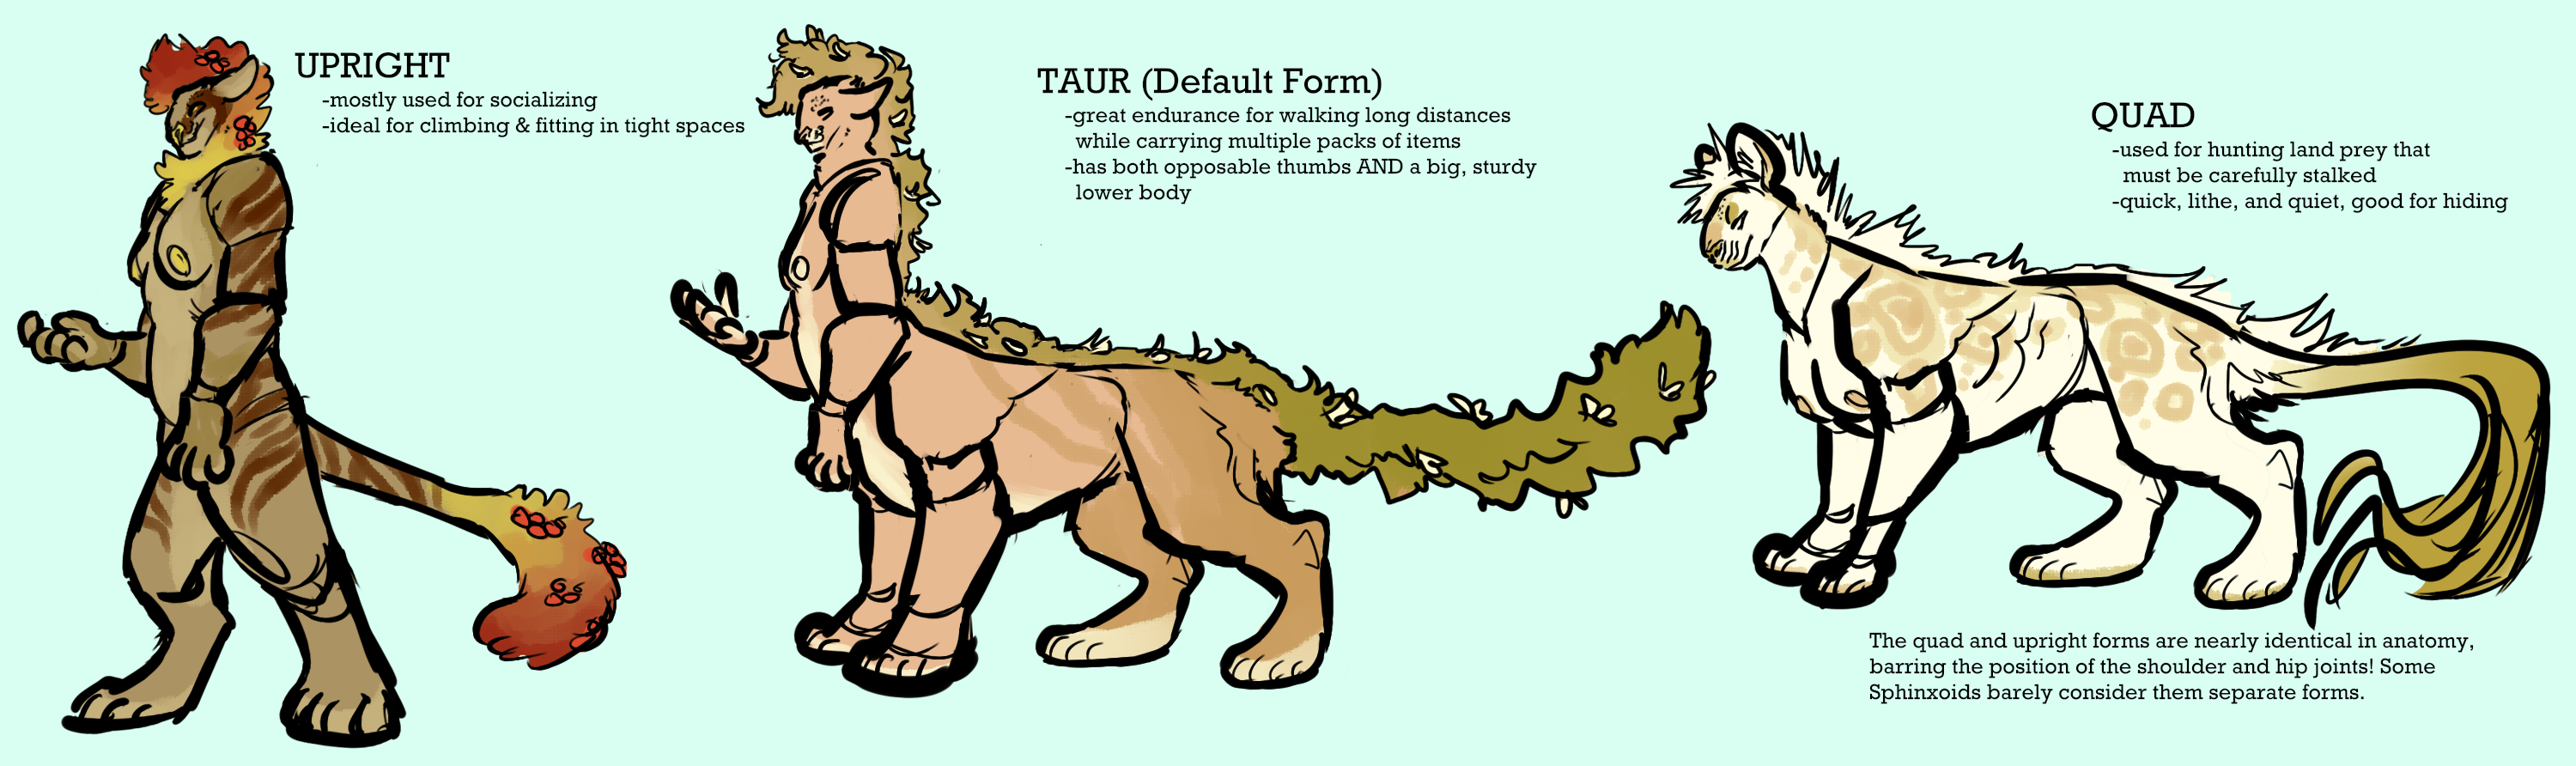 A drawing of Sphinxoids in their three different forms. Taur (default form): great endurance for walking long distances while carrying multiple packs of items. Has both opposable thumbs and a big, sturdy lower body. Upright form: mostly used for socializing, ideal for climbing and fitting in tight spaces. Quad form: used for hunting land prey that must be carefully stalked. Quick, lithe, and quiet, good for hiding.